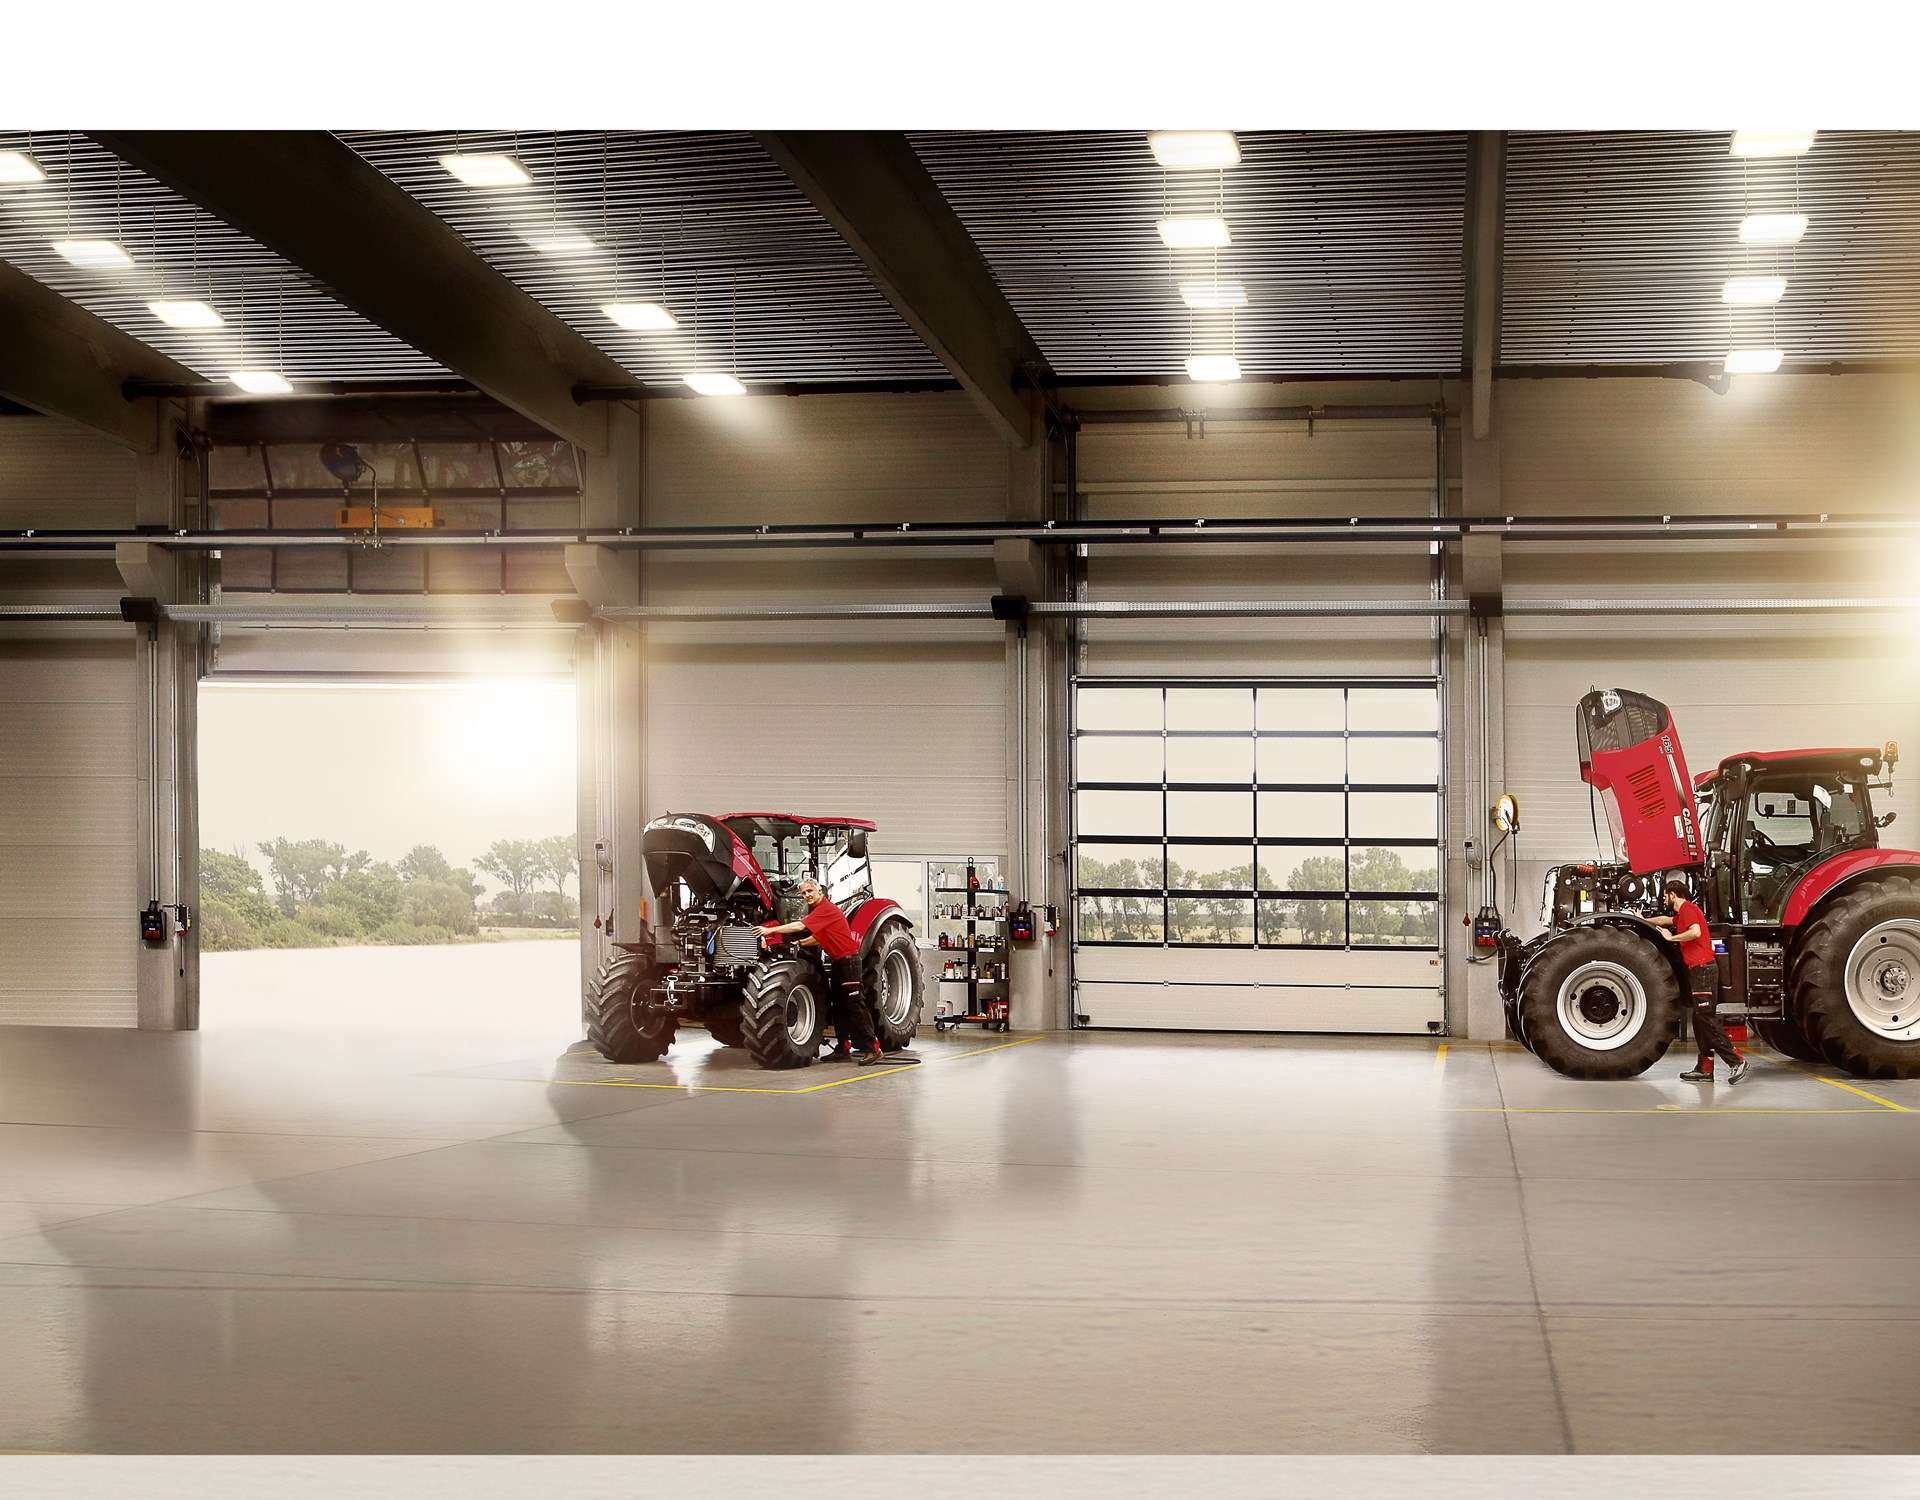 Case IH unleashes new range-topping Optum 340 CVXDrive - Farmers Weekly